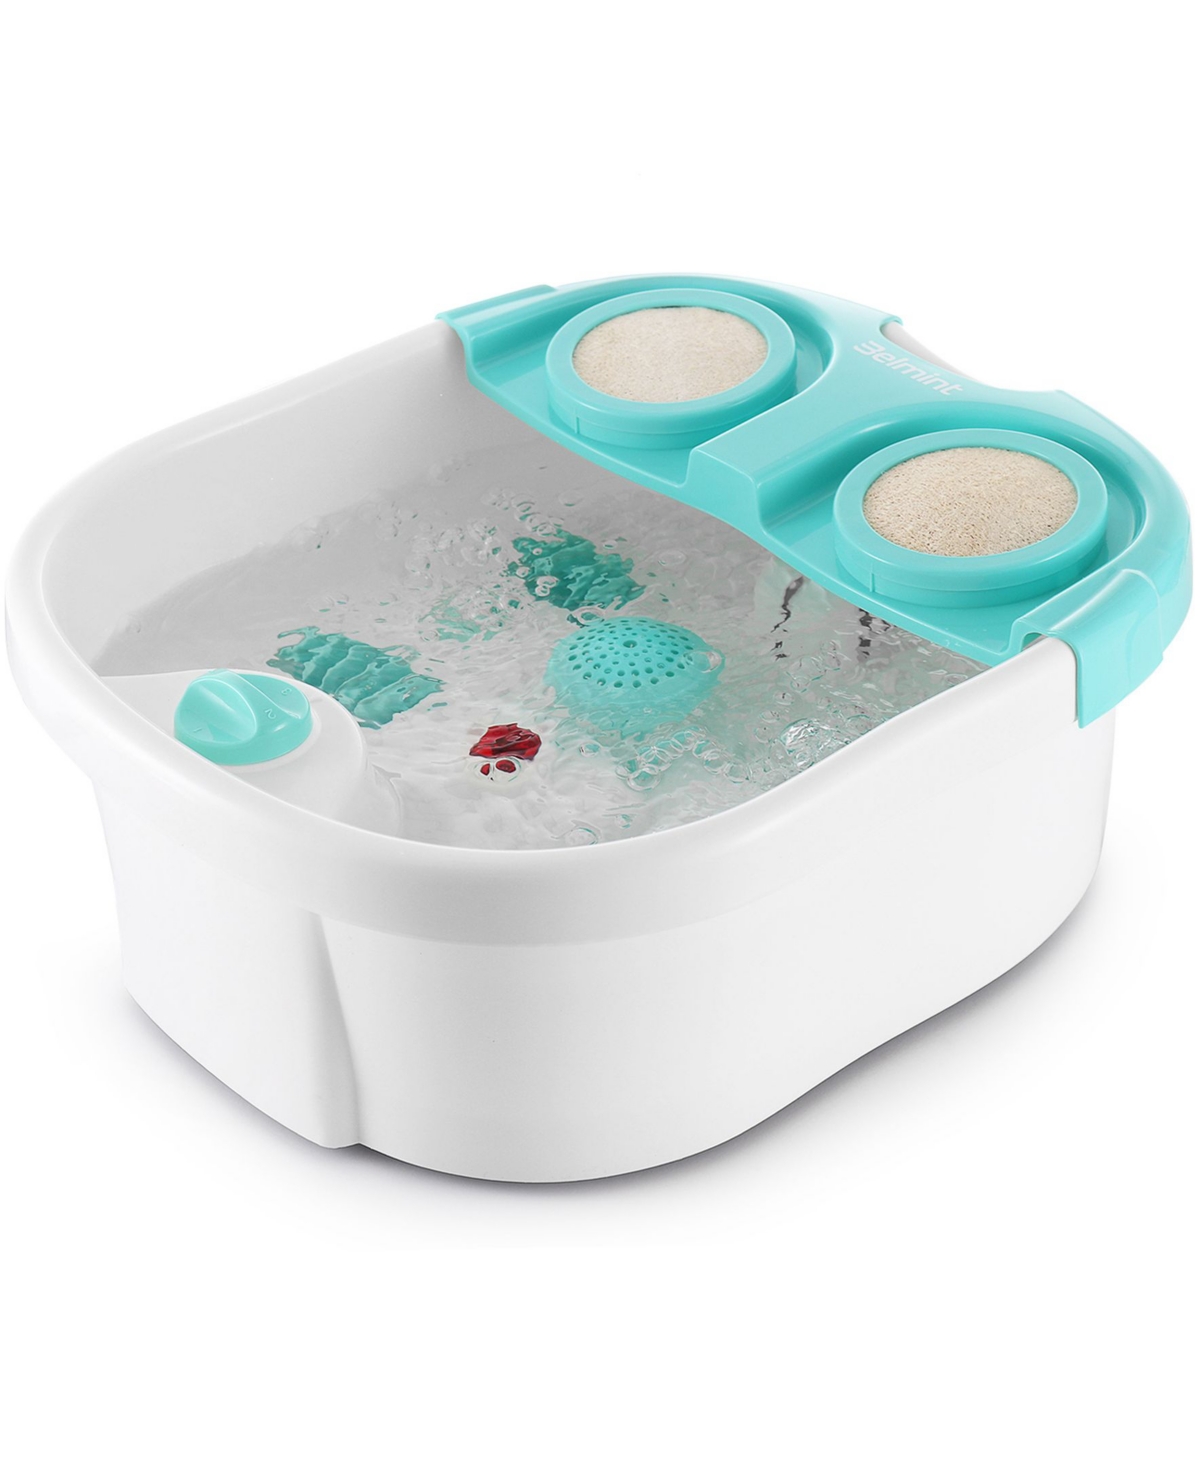 Belmint Portable Pure Calf Foot Spa with Large Led Display